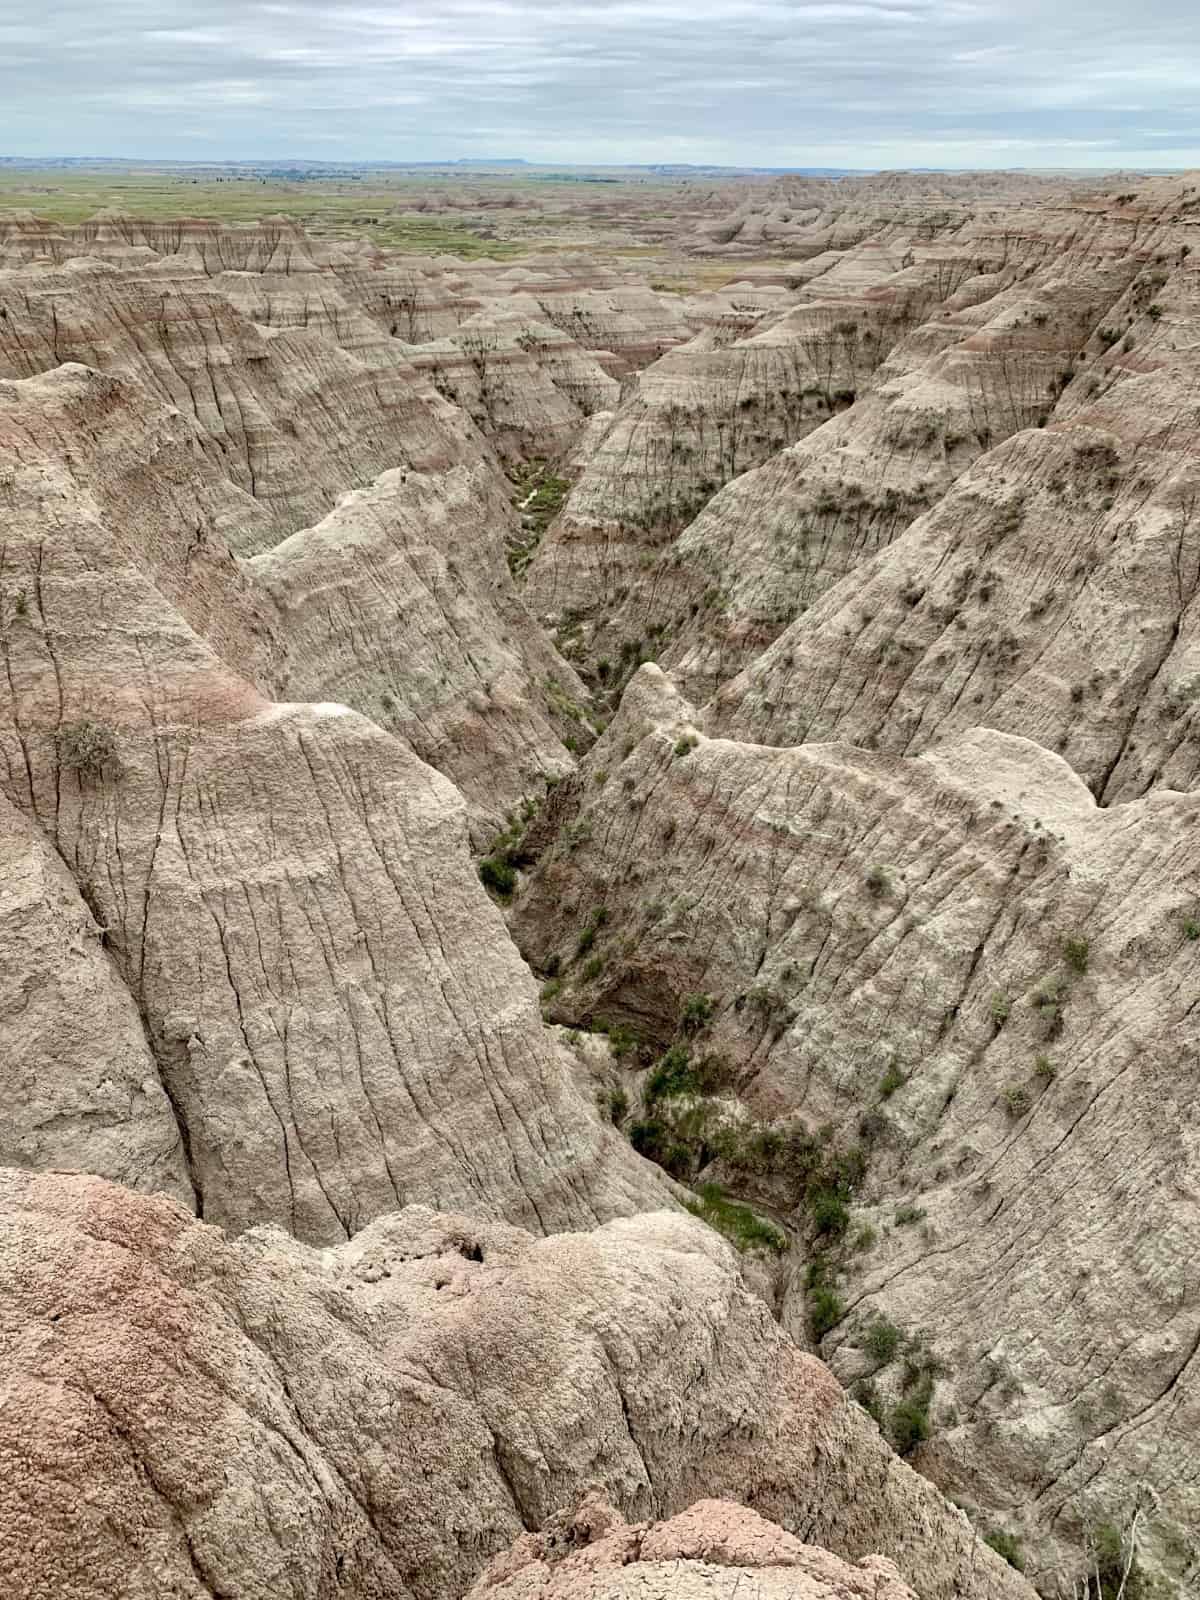 Planning a Trip to Badlands National Park | Why a roadtrip to South Dakota's Badlands is a must, and an easy day trip from Rapid City. What route to take, costs, things to do in Badlands, where to stop, and many more tips (including a stop at Wall Drug!). South Dakota roadtrip ideas, visiting national parks, social distance roadtrip ideas. #southdakota #nationalpark #nps #badlands #roadtrip